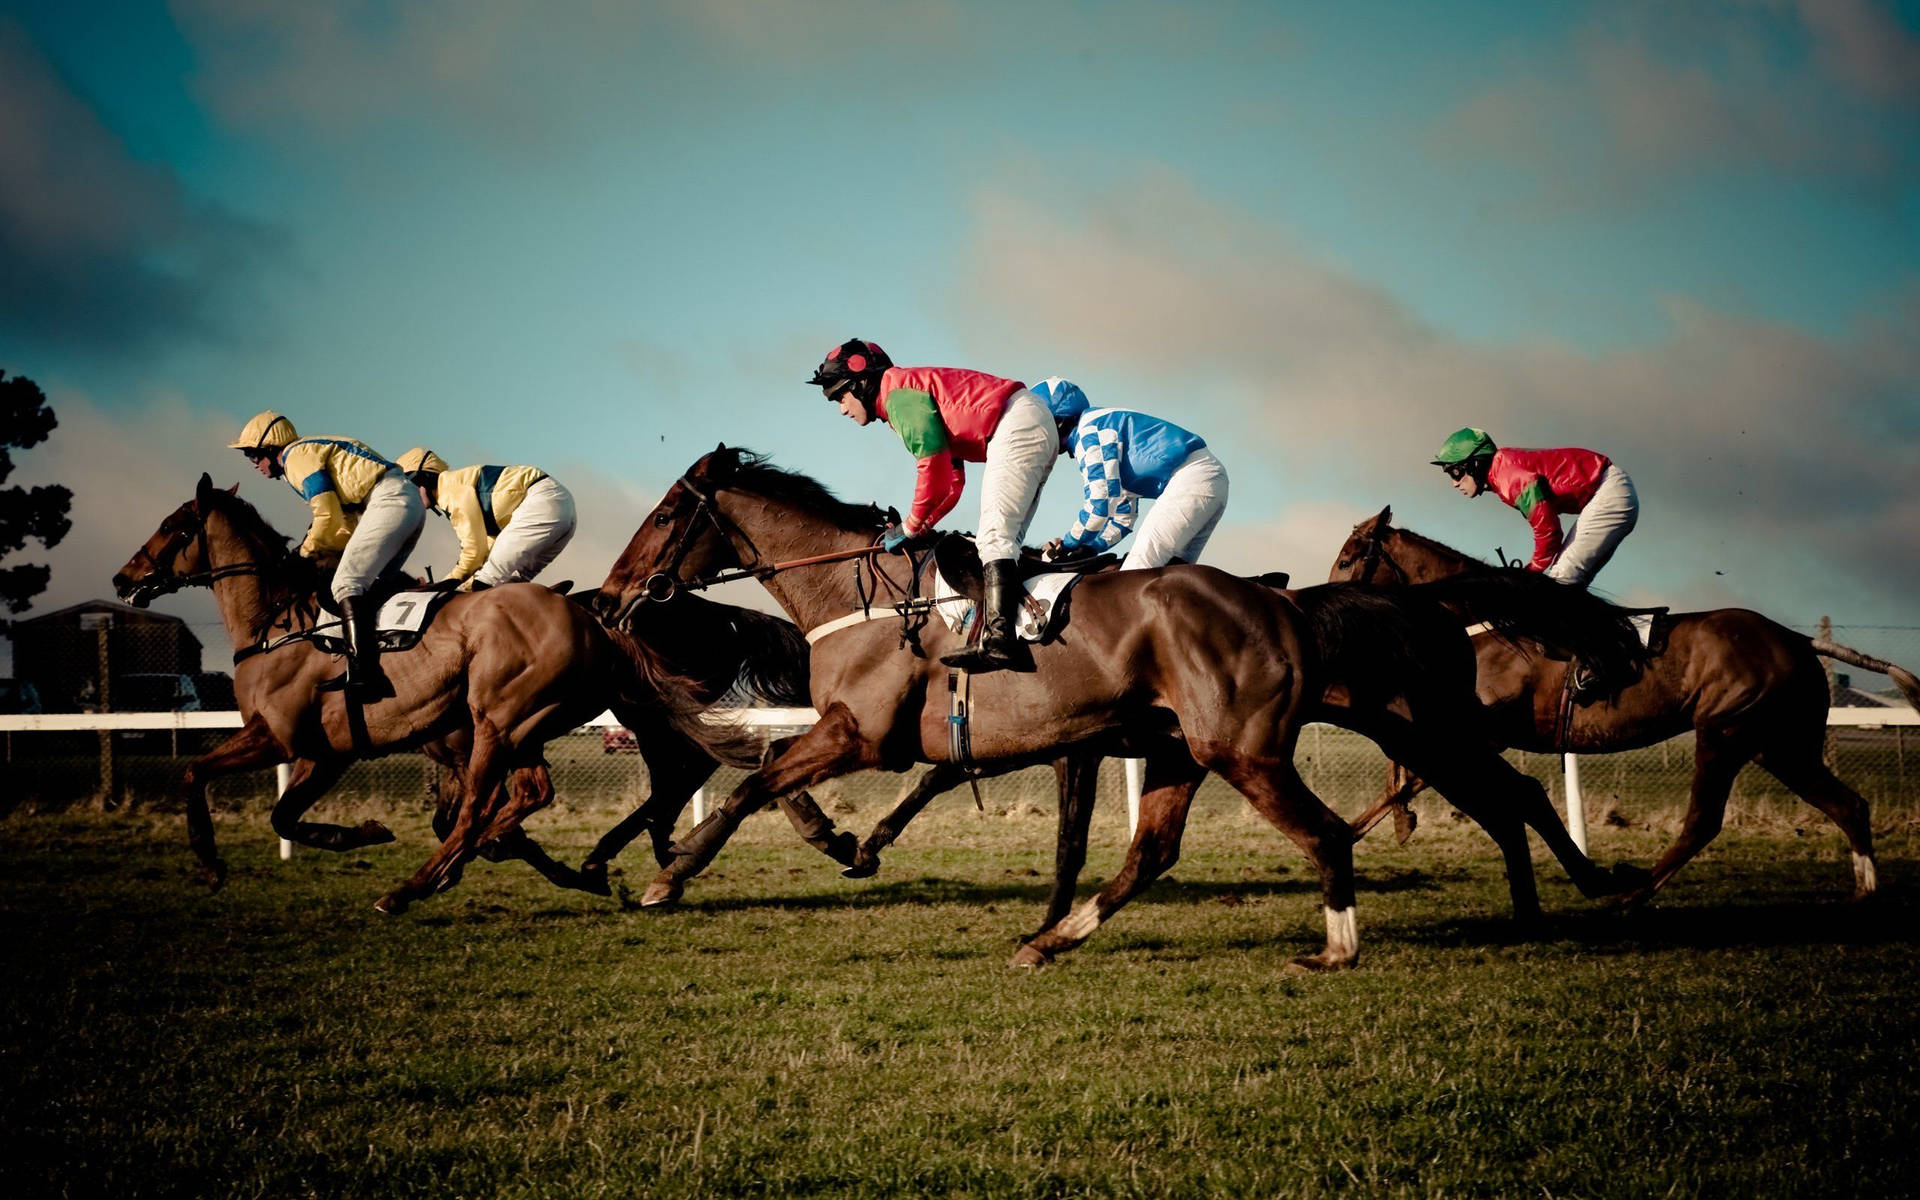 Free Horse Racing Wallpaper Downloads, [100+] Horse Racing Wallpapers for  FREE 